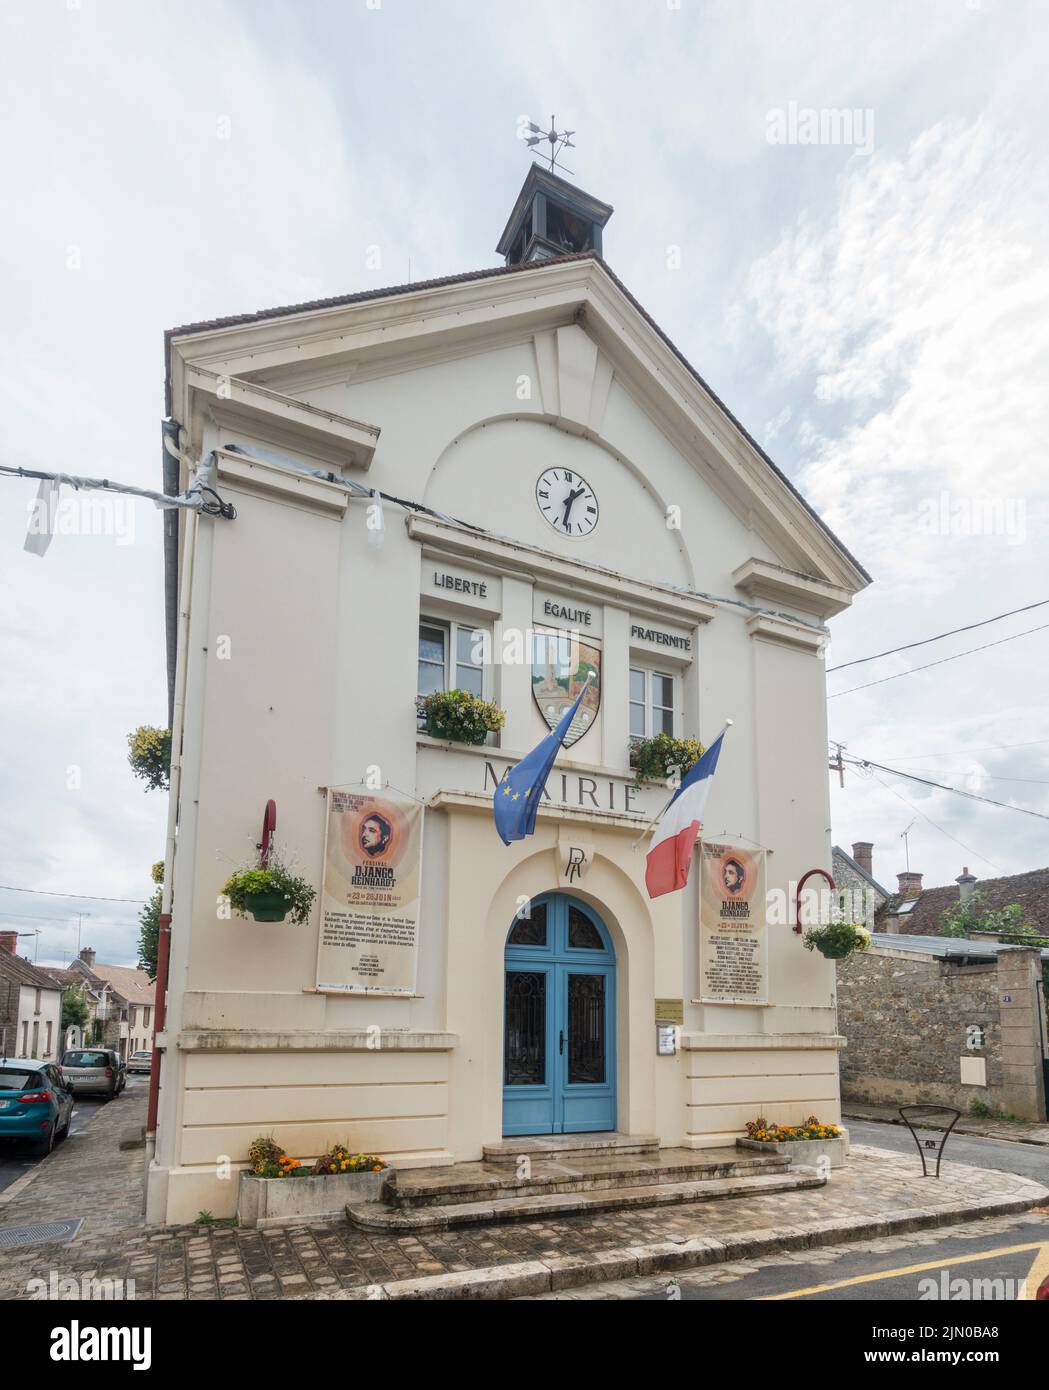 Town hall, city hall building in centre of french village Samois sur seine, Ile de France, France Stock Photo